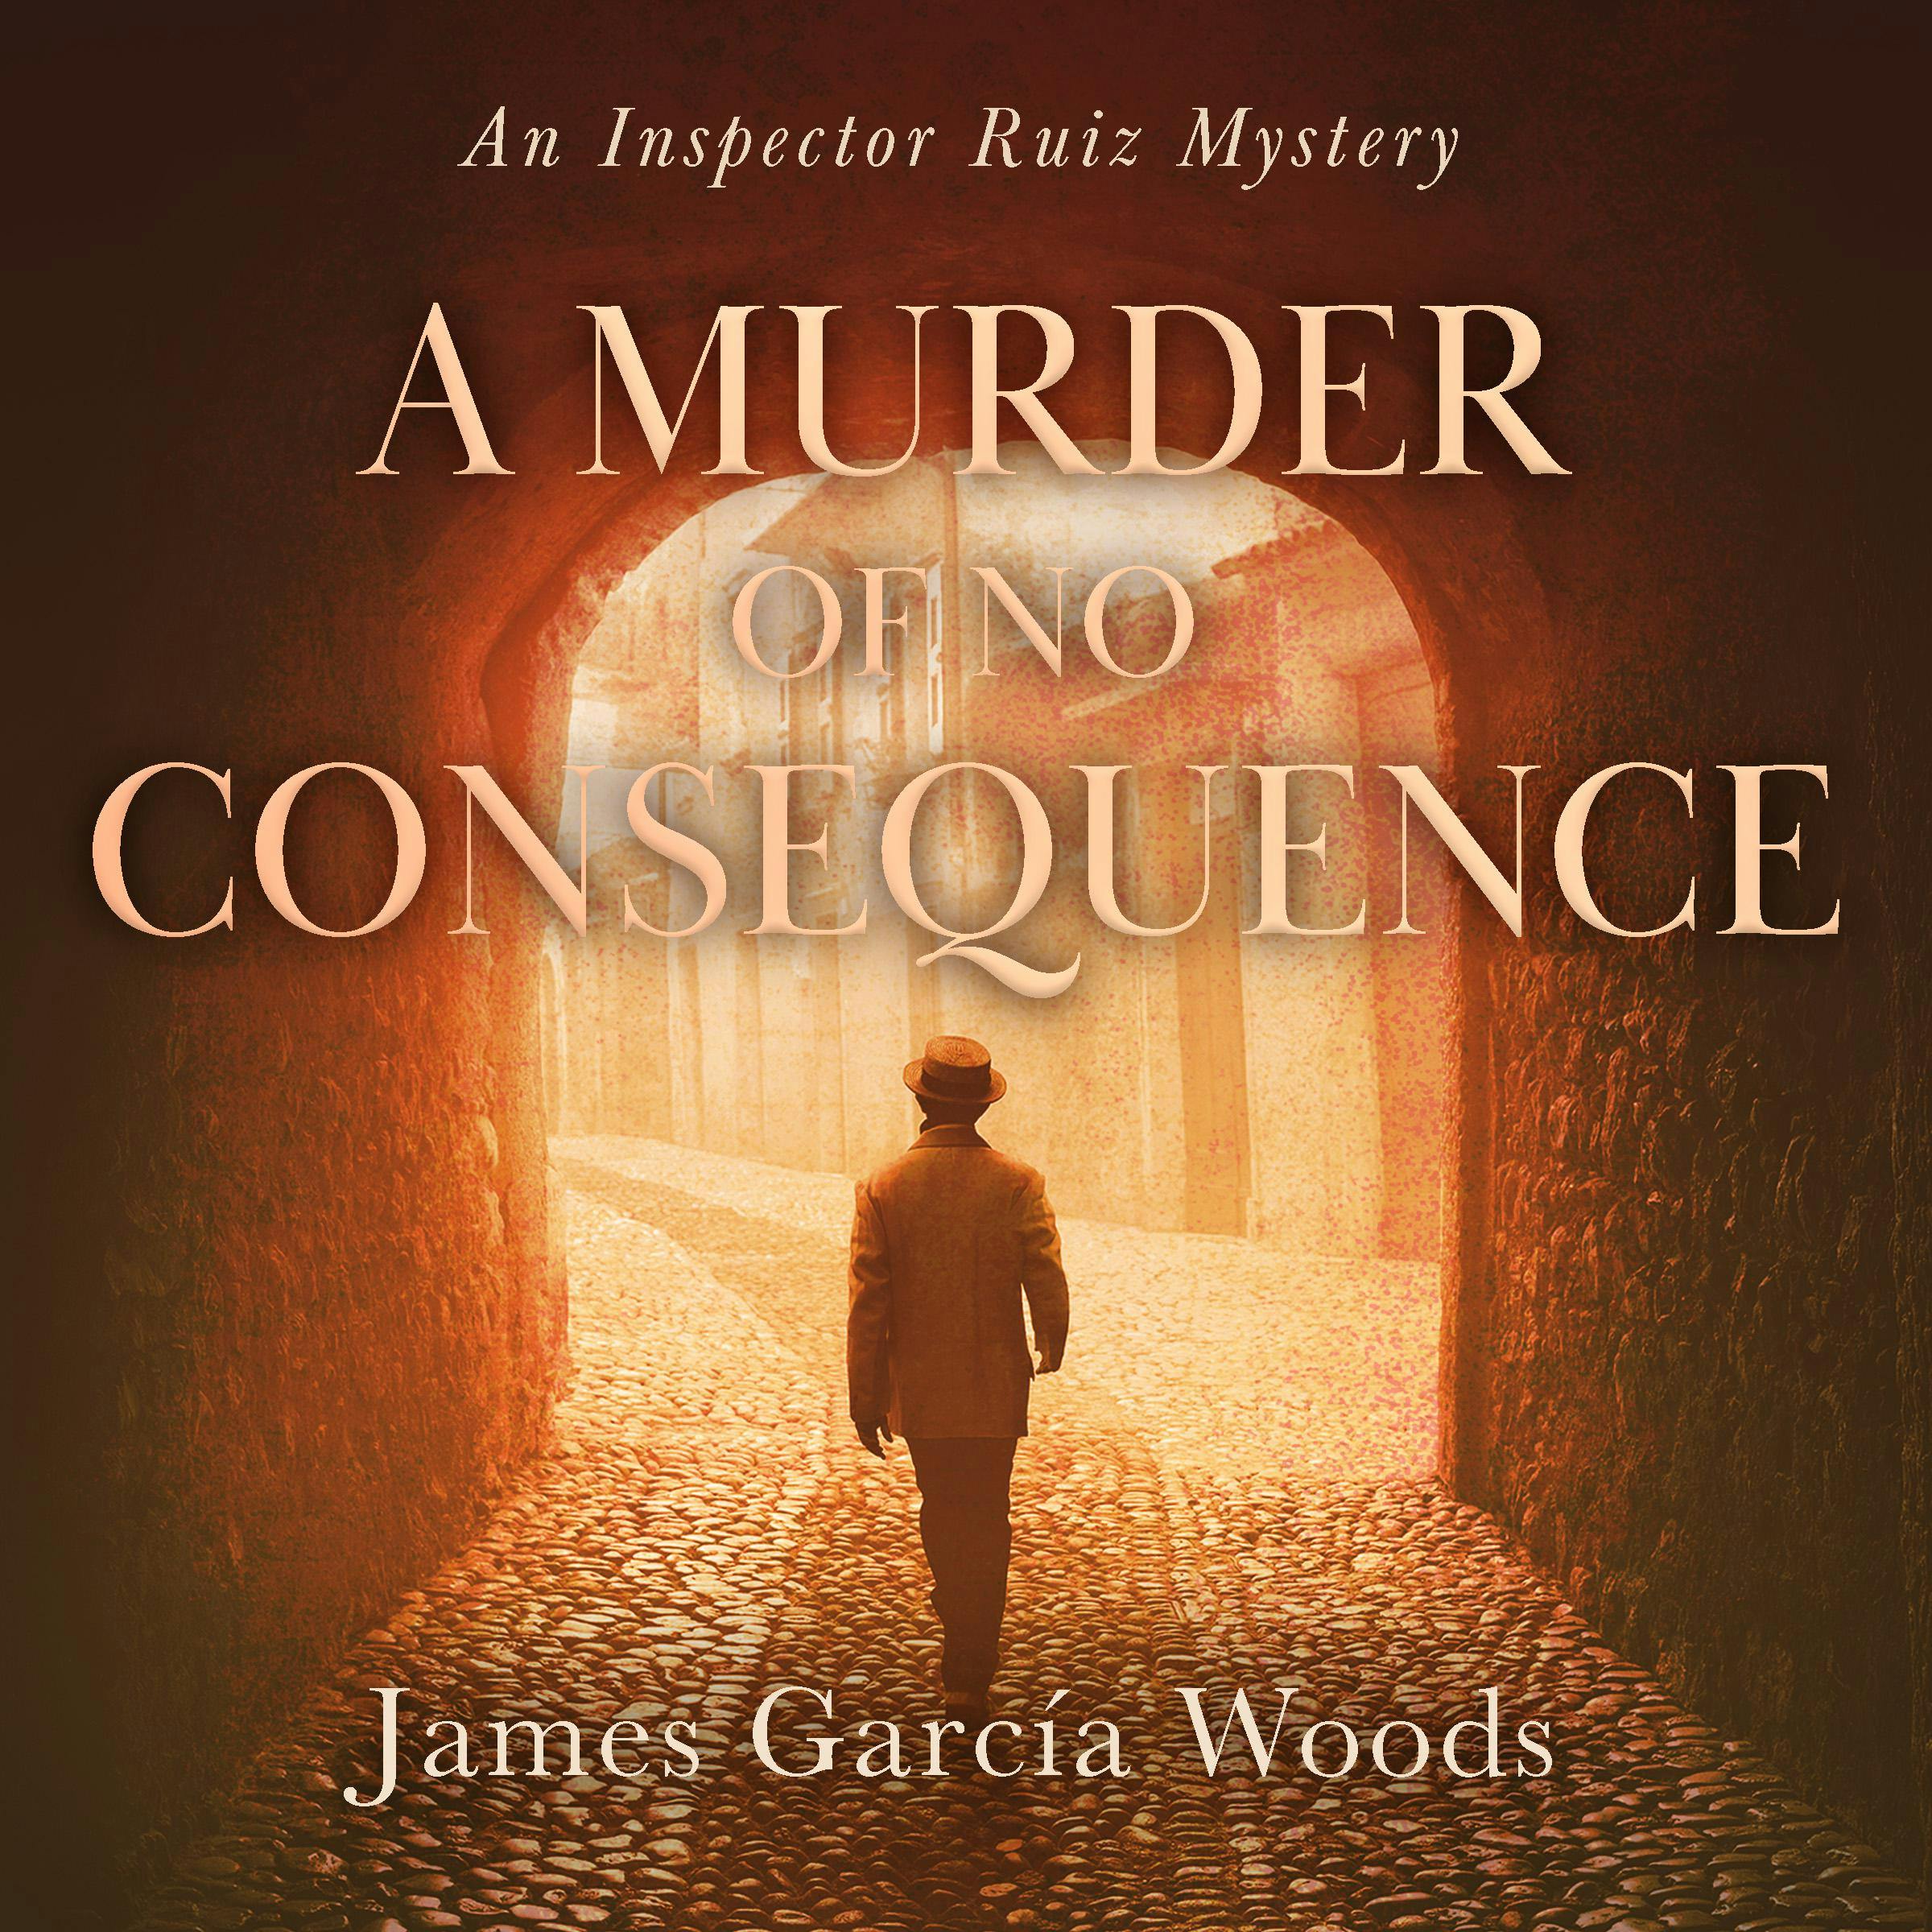 A Murder Of No Consequence: Digitally narrated using a synthesized voice - James Garcia Woods